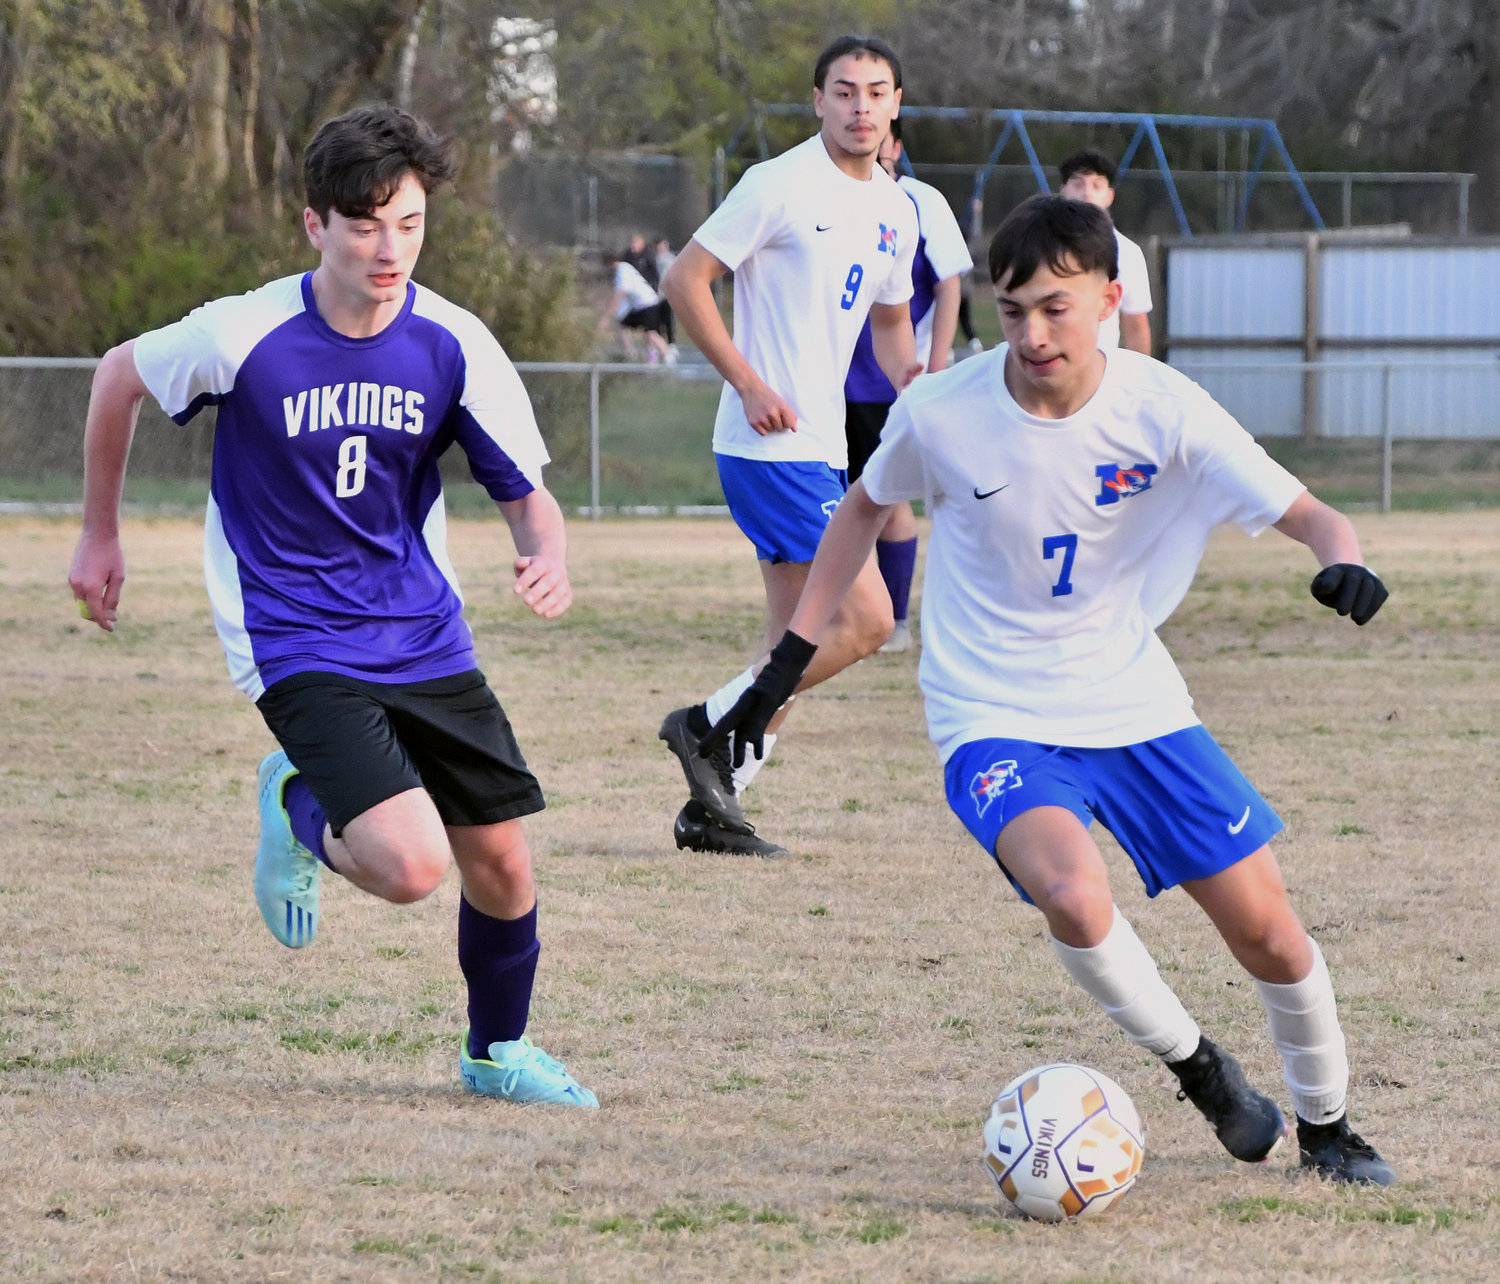 Imar Pineda (7) of the Tigers controls the ball with Brody Ray (8) of the Vikings in pursuit. Pineda had the tying goal for Marshall County.